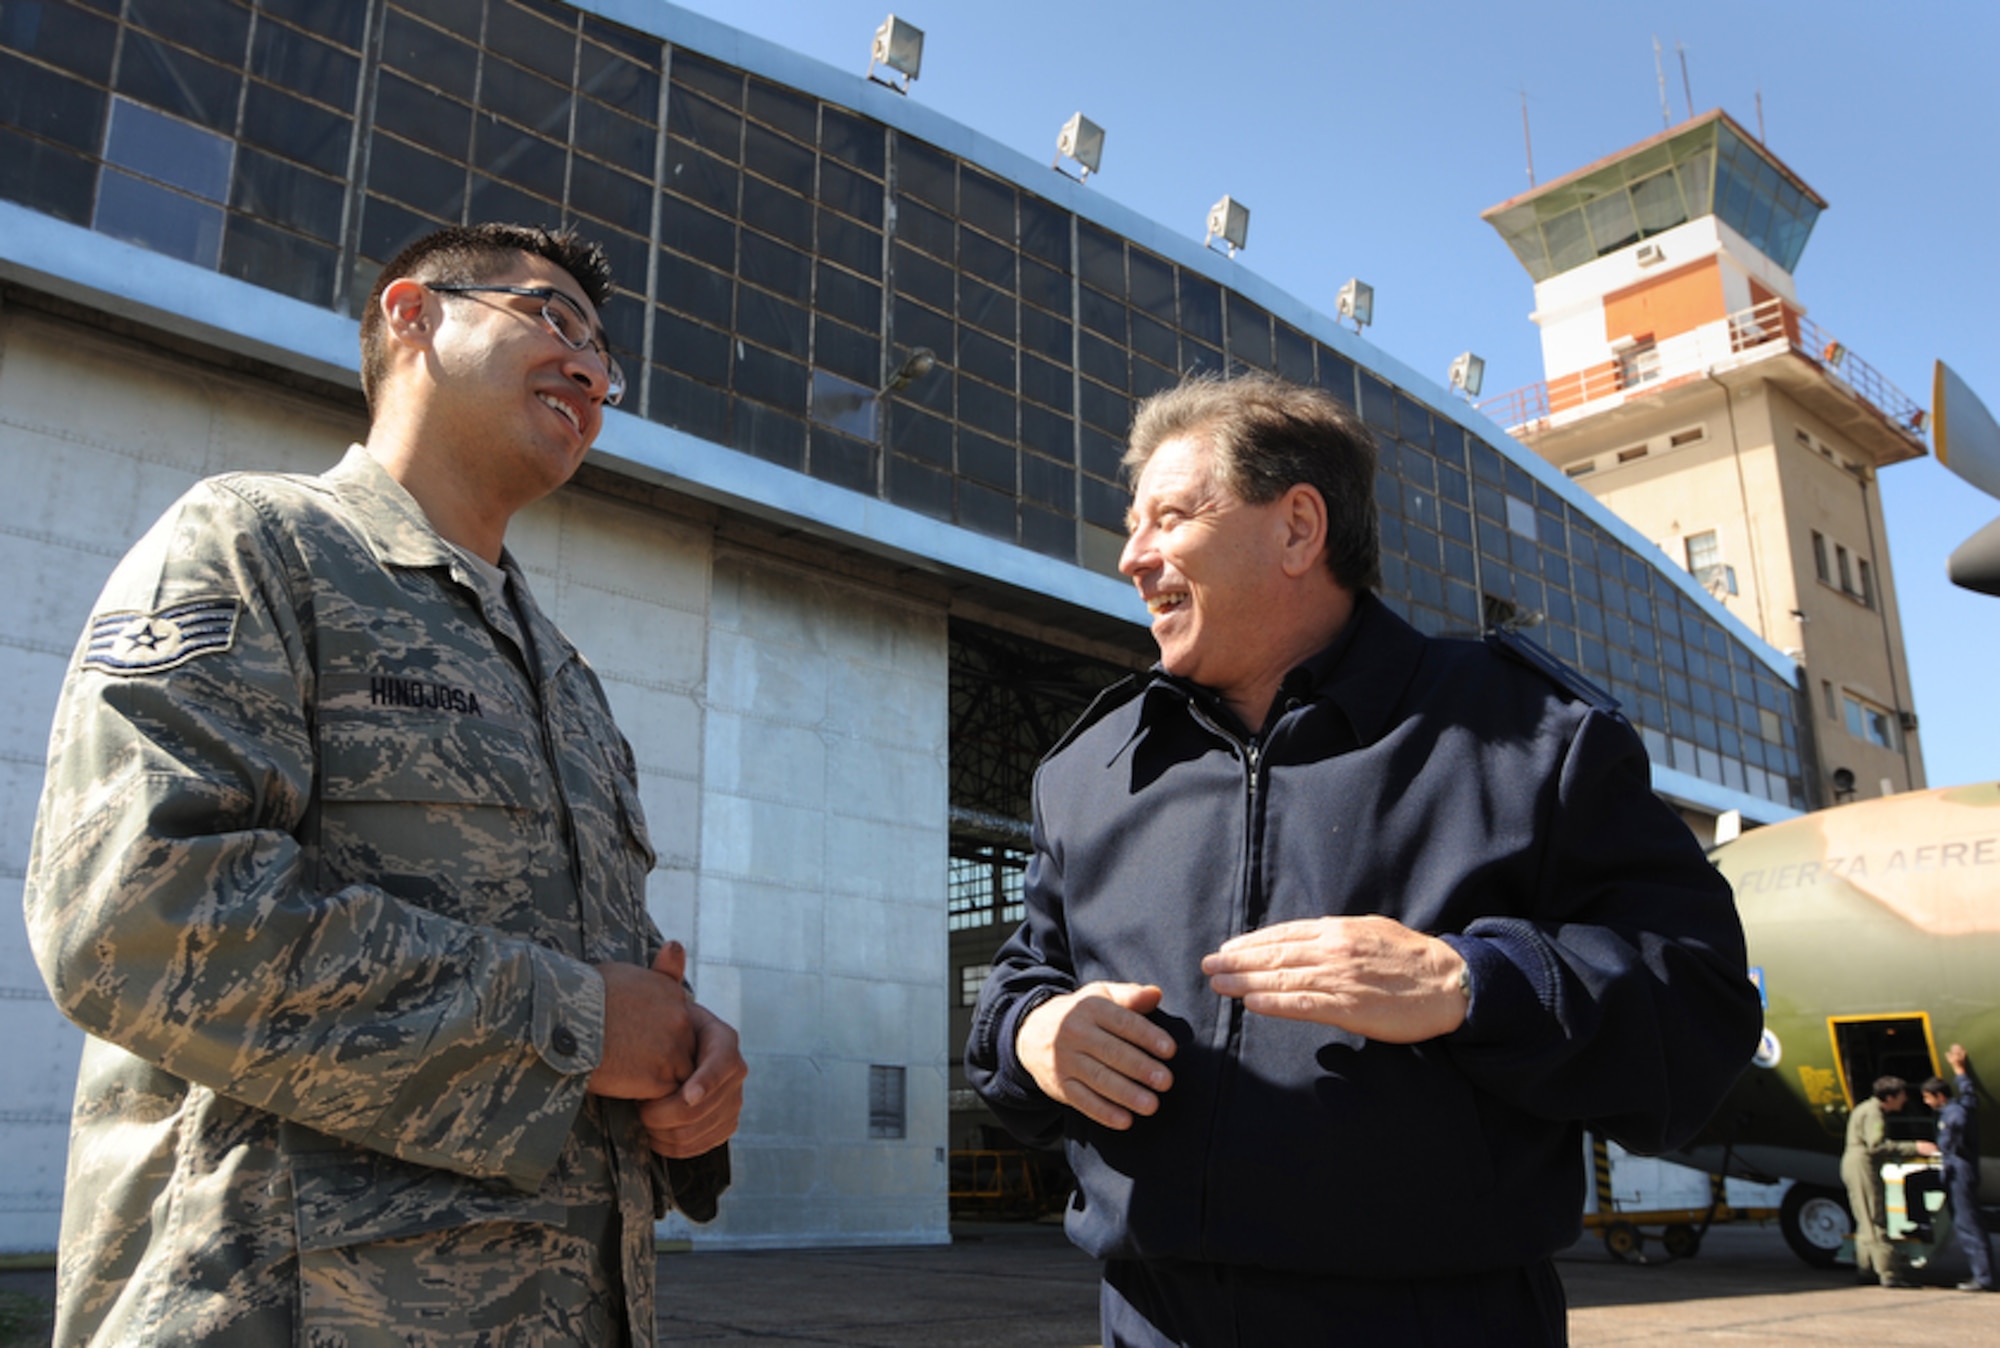 Staff Sgt. David Hinojosa (left) shares stories Oct. 30 with former student (right) Argentinean air force Senior Master Sgt. Jose Minichiello, training superintendent for the 1st Air Brigade, Technical Group D. The exchange between the two countries' Airmen is part of Operation Southern Partner, which brings U.S. Air Force Airmen to South America to have a two-week subject matter exchange emphasizing partnership, cooperation and sharing of information with partner nation Air Forces in Latin America. Sergeant Hinojosa is an aircraft structural maintenance instructor for the Inter-American Air Force Academy at Lackland Air Force Base, Texas. (Air Force photo/Staff Sgt. Bennie J. Davis III) 